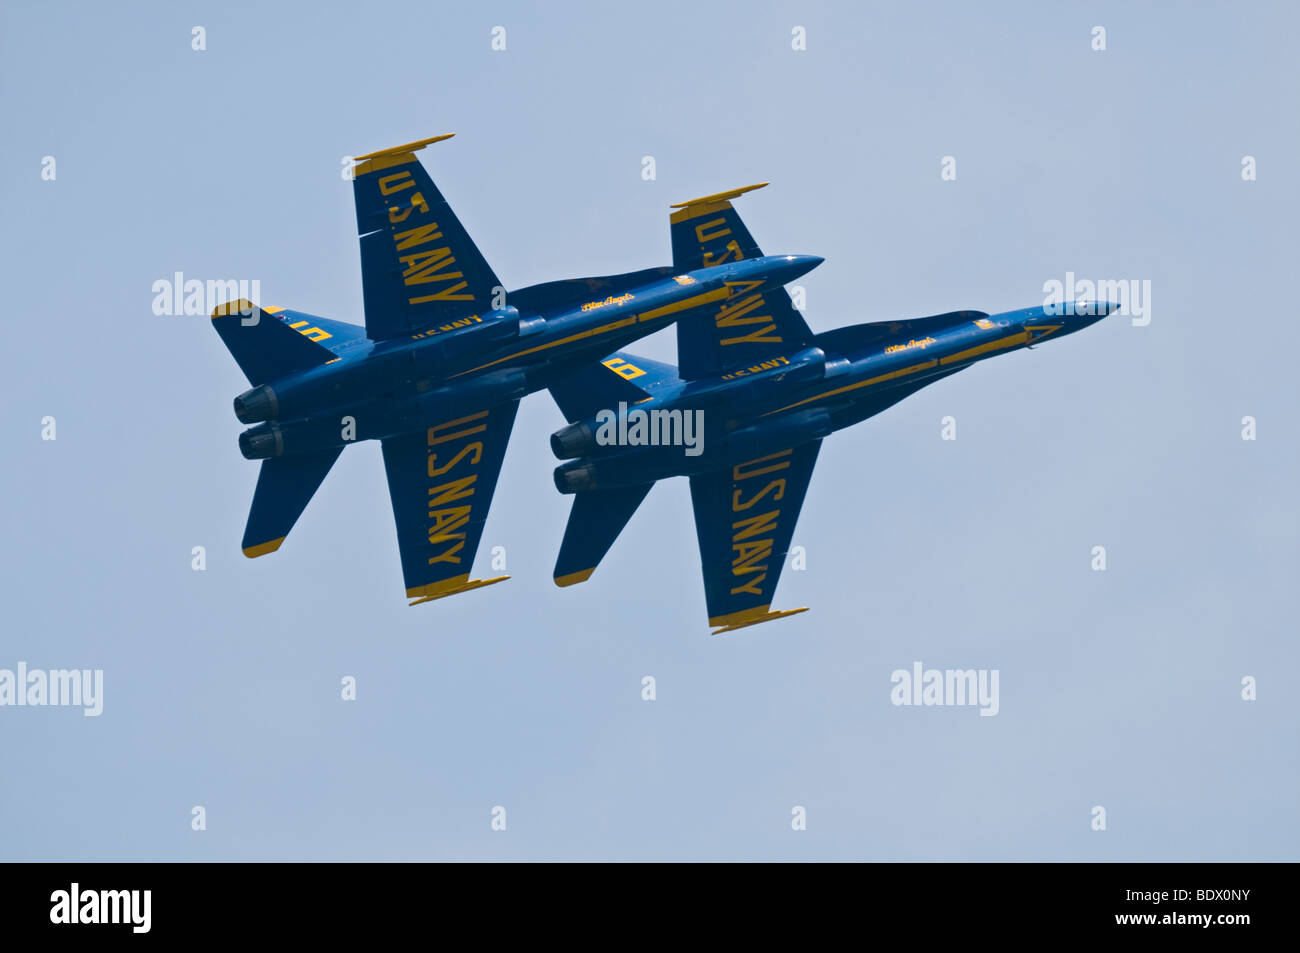 Two members of the US Navy's Blue Angels Demonstration Squadron flying Boeing F/A-18 Hornet fighter jets in tight formation. Stock Photo